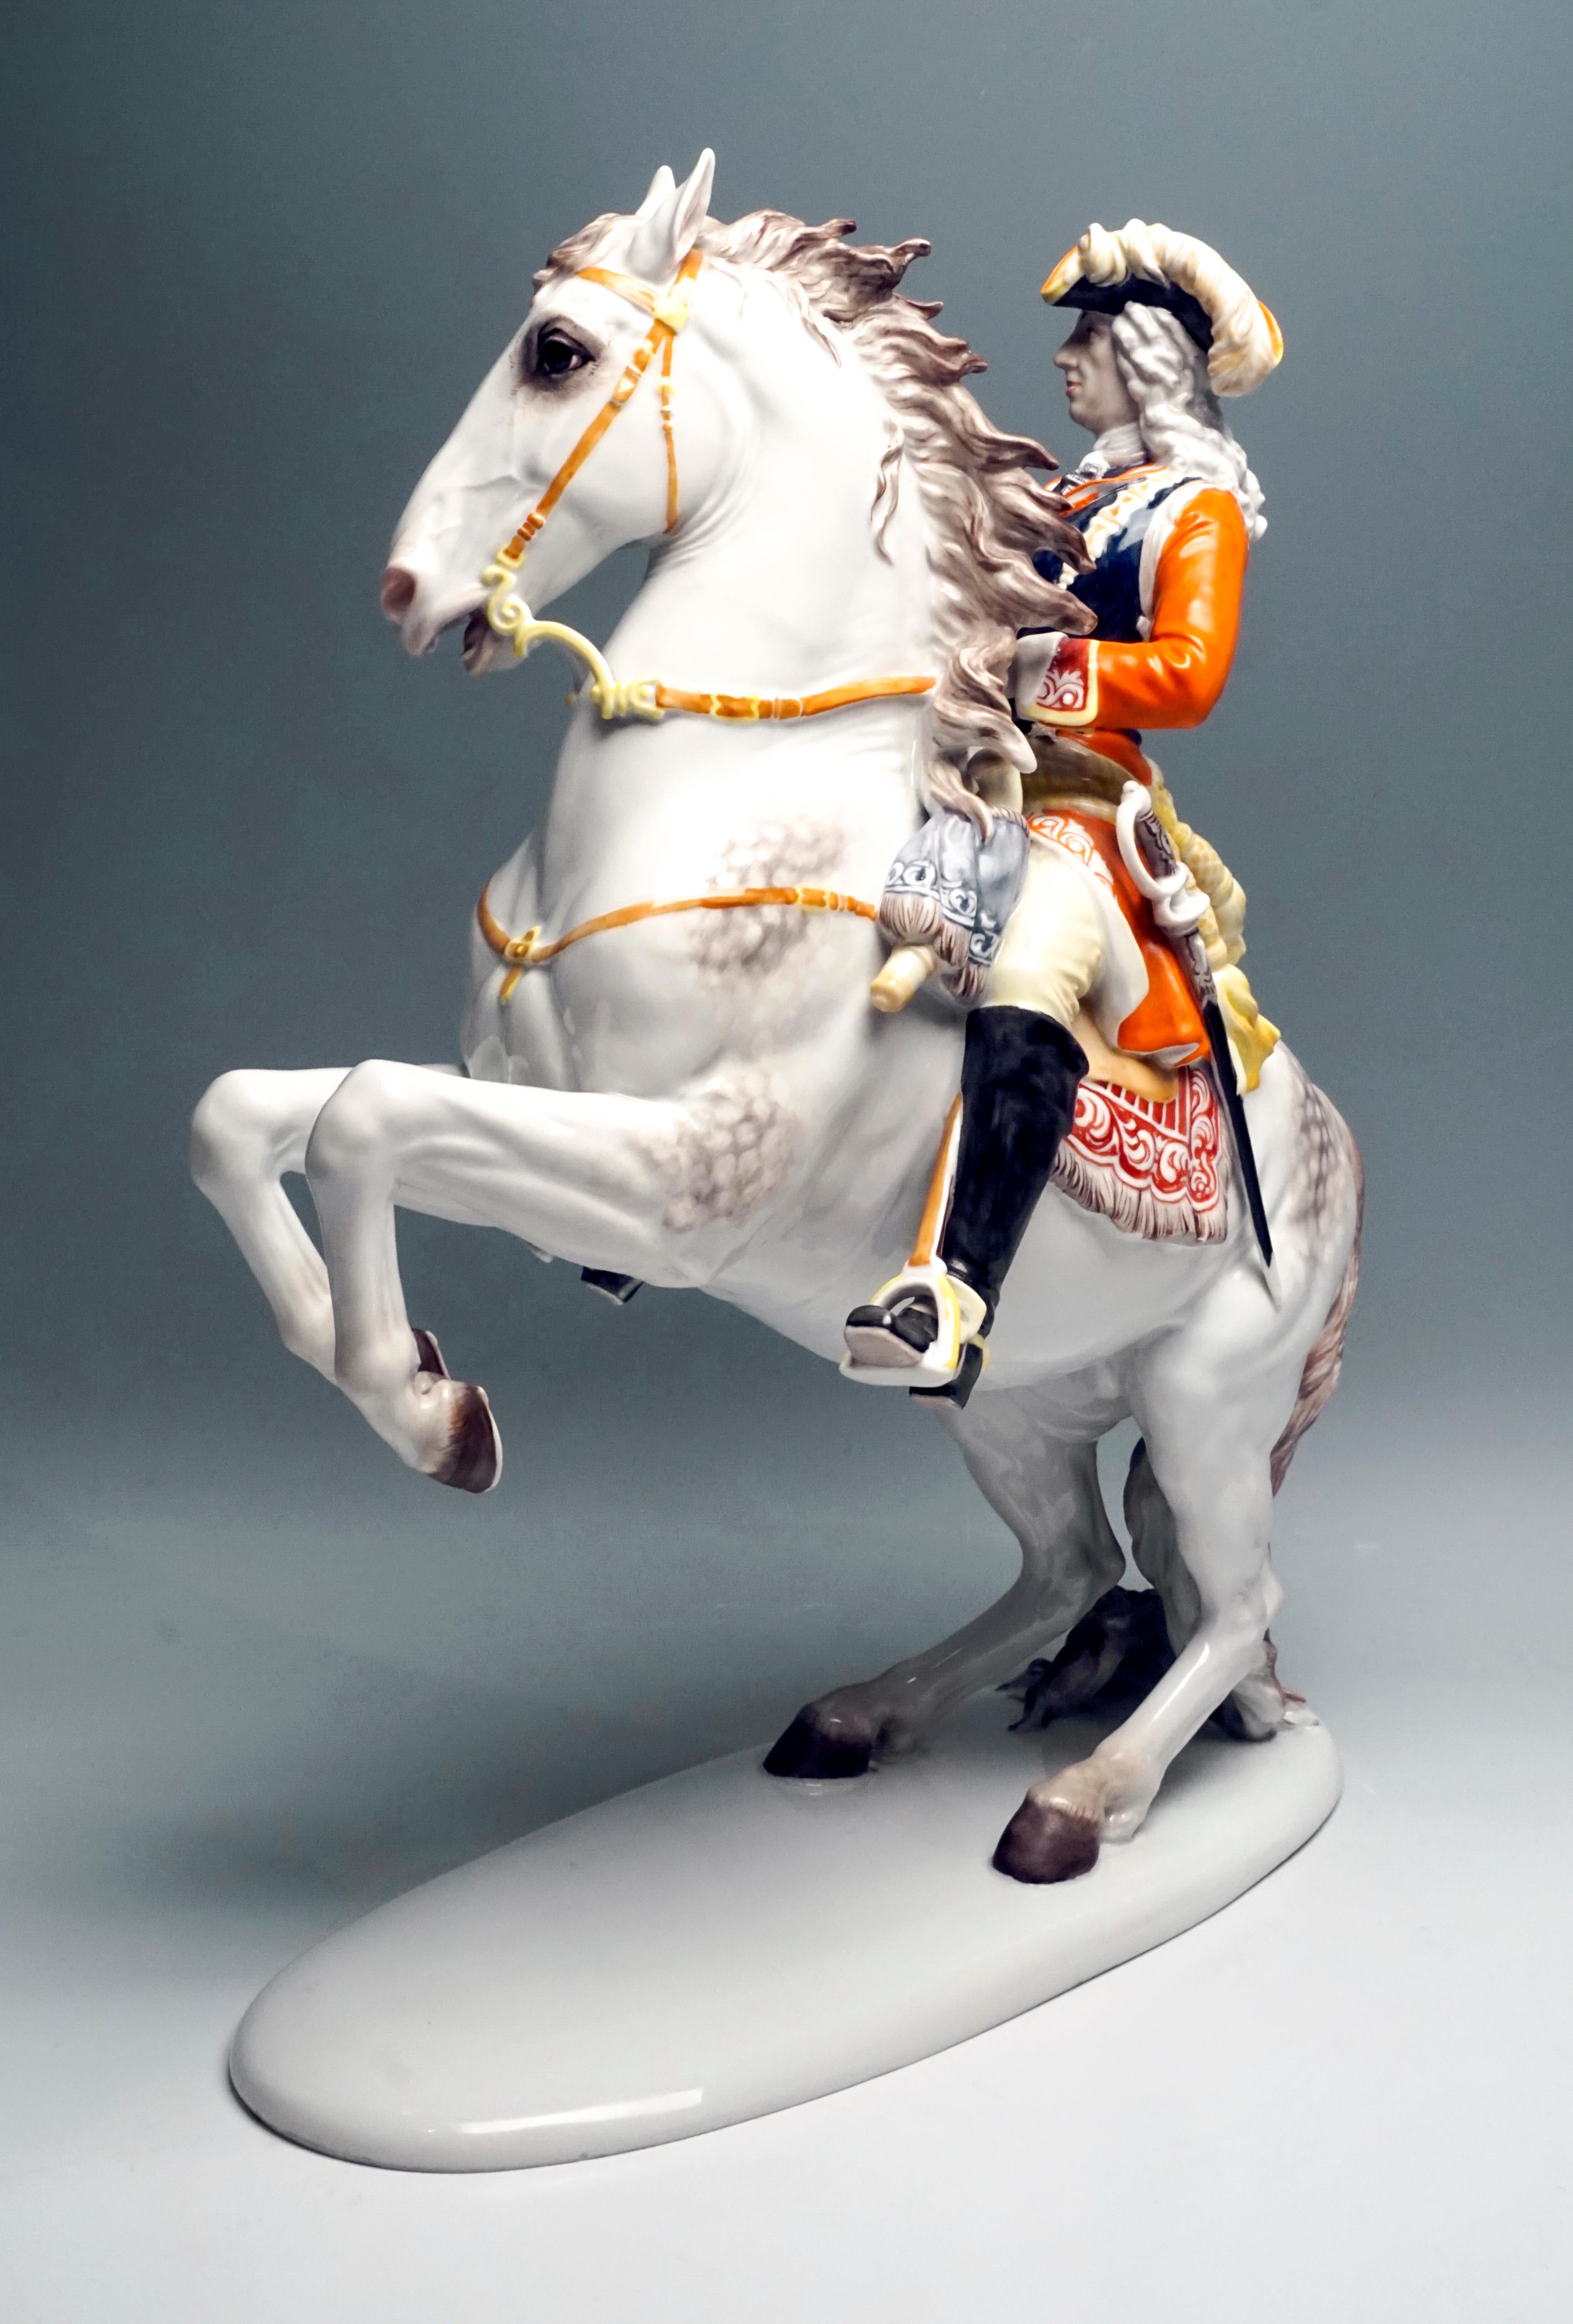 Depiction of Prince Eugene of Savoy with baroque curly wig and trident, with torso armor over red coat on horseback. The 'Golden Fleece', one of the oldest and most important knightly orders, lies around his neck, and he is holding the Field